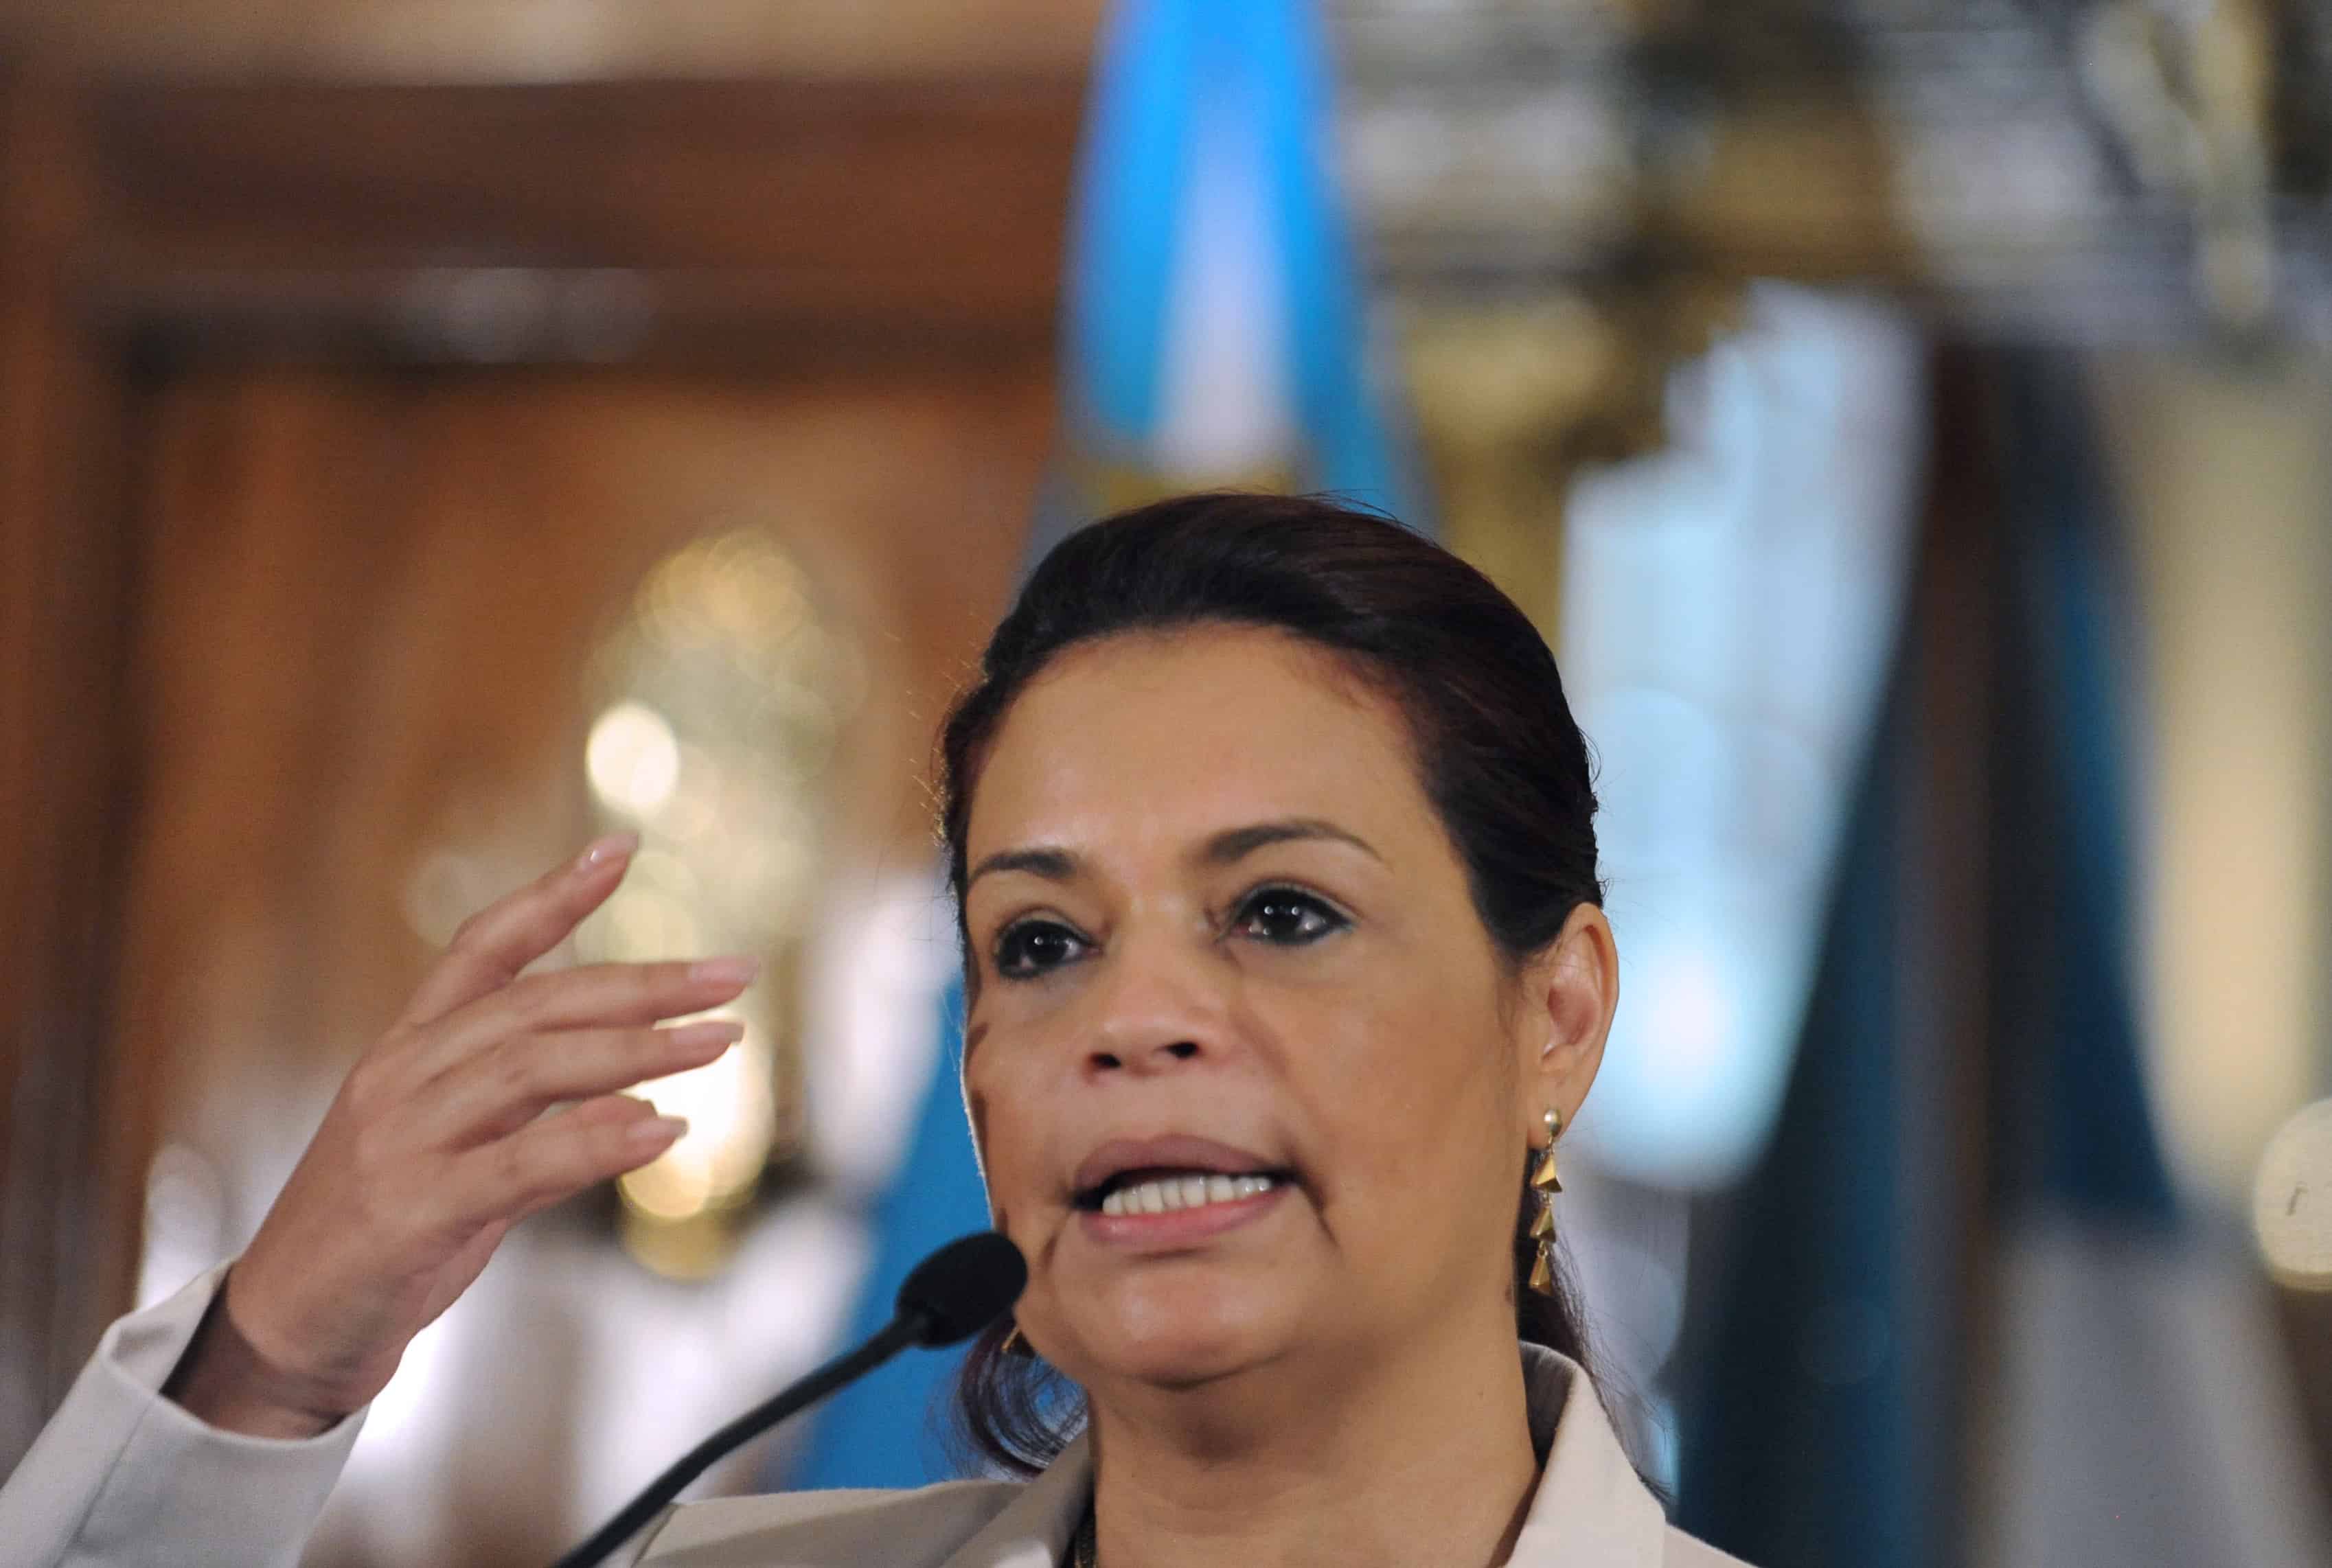 Guatemala's Vice President Roxana Baldetti offers a press conference at the presidential residence in Guatemala City on April 19, 2015. Baldetti resigned on May 8, 2015 amid a tax corruption scandal, in which her former private secretary Juan Carlos Monzón was allegedly involved.